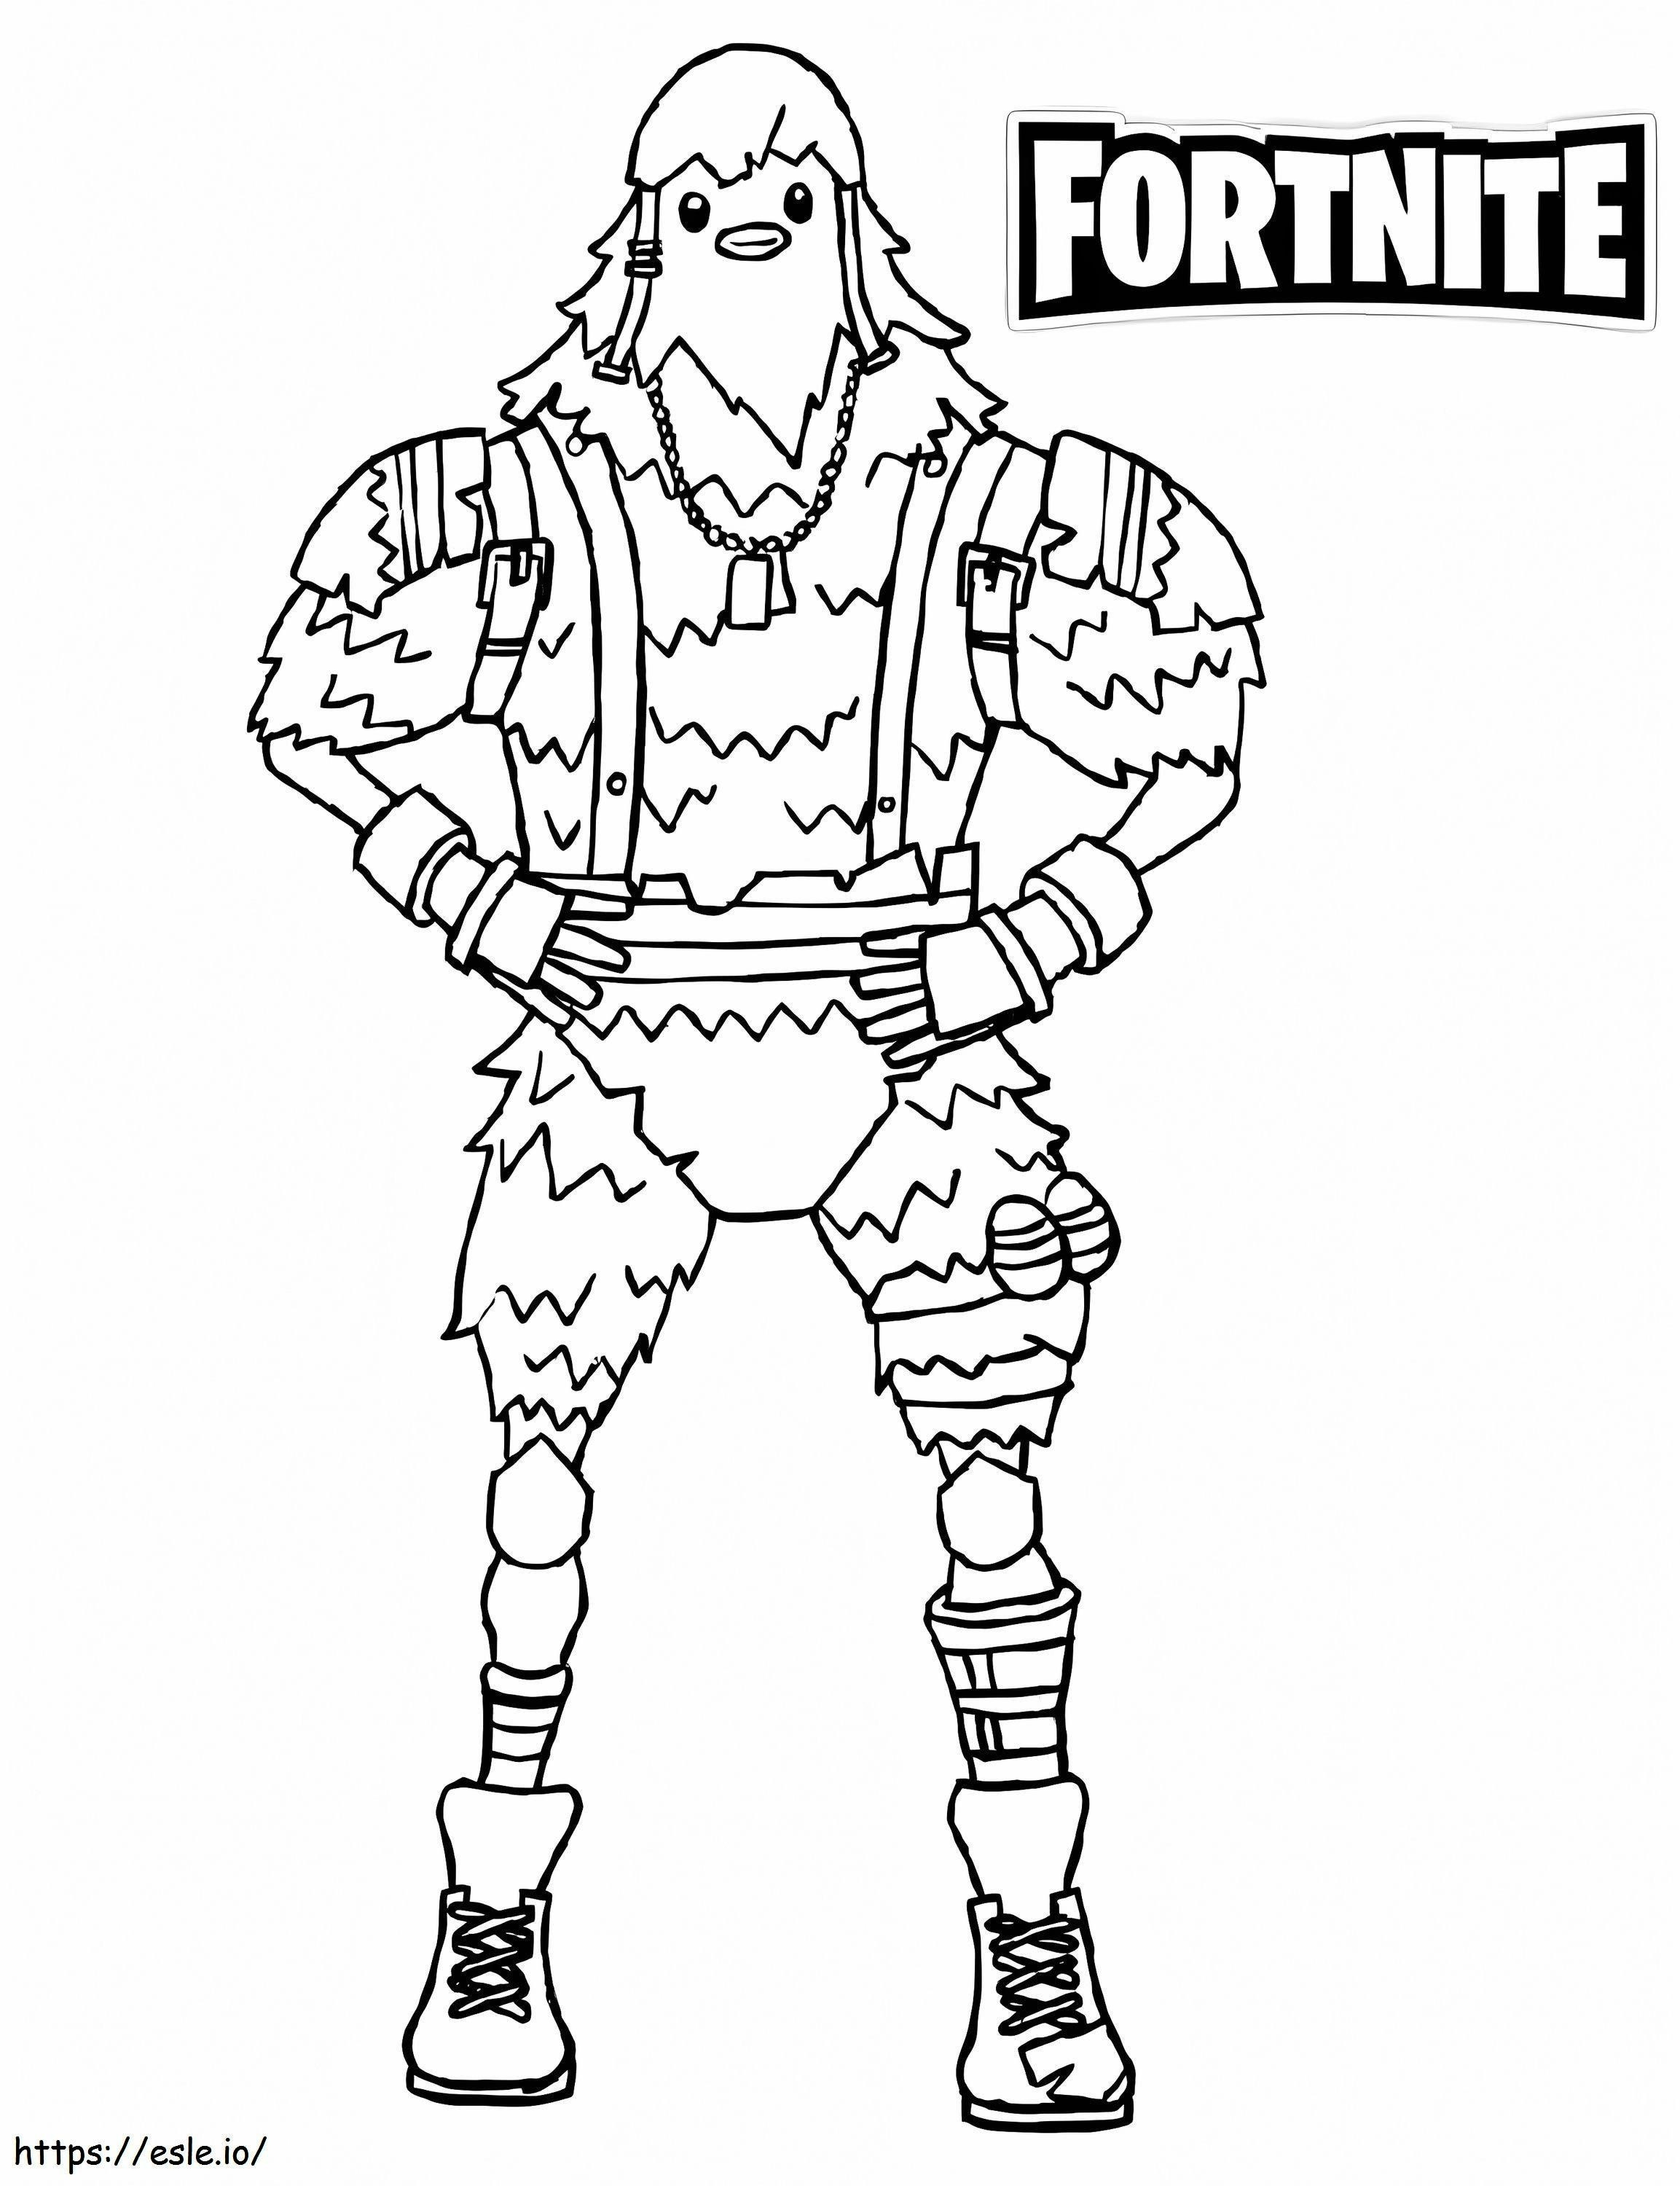 Cluck Fortnite 3 coloring page